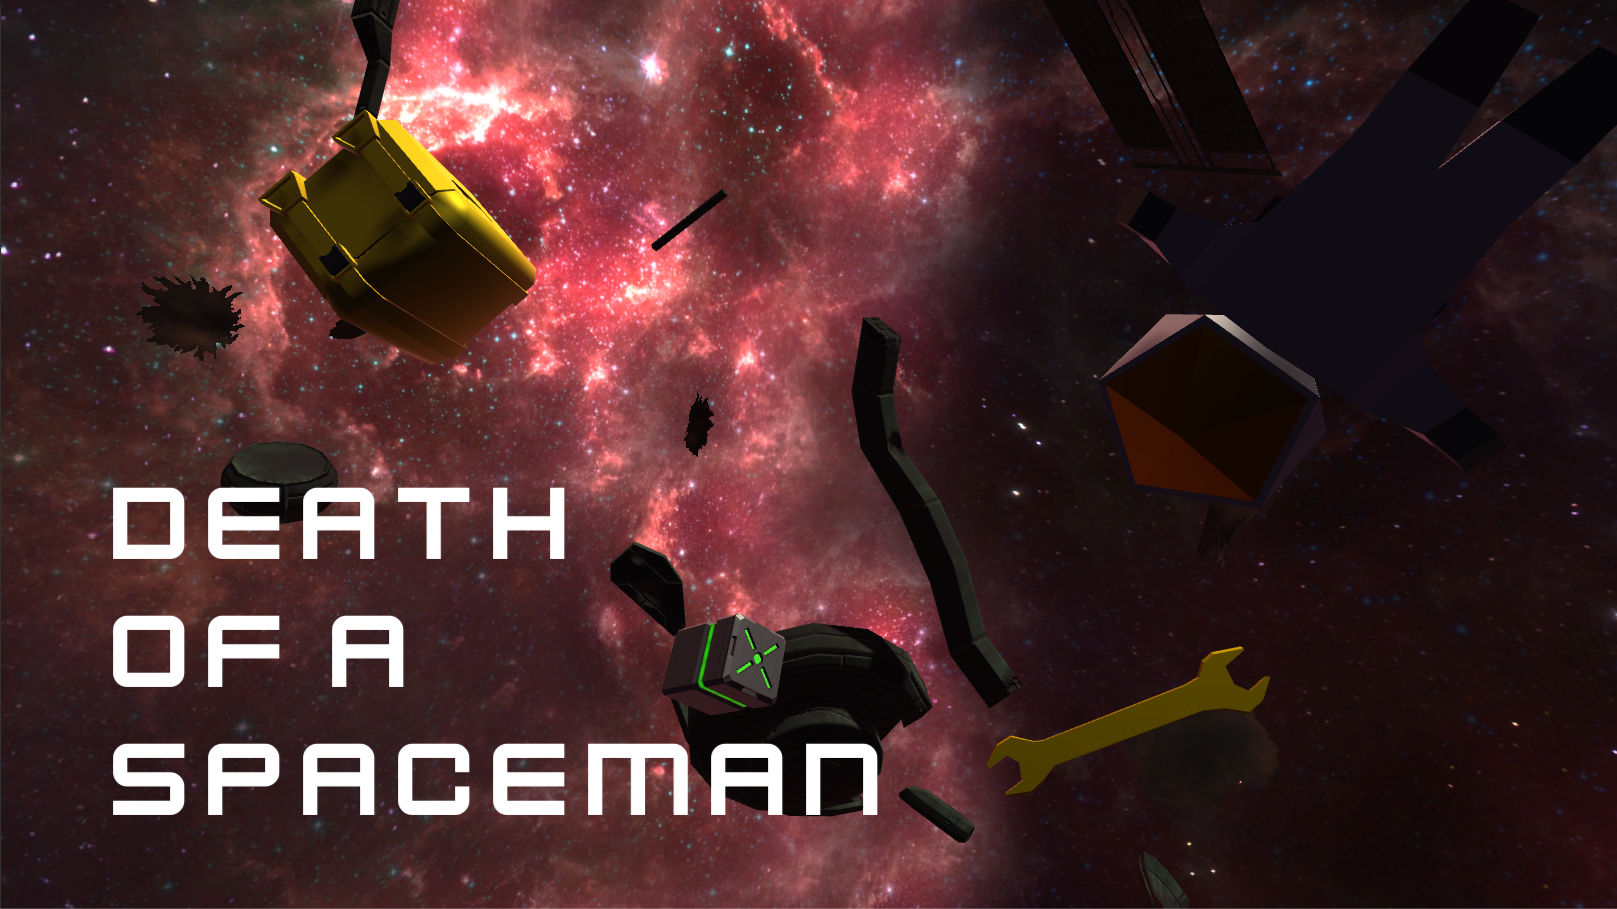 Death of a spaceman